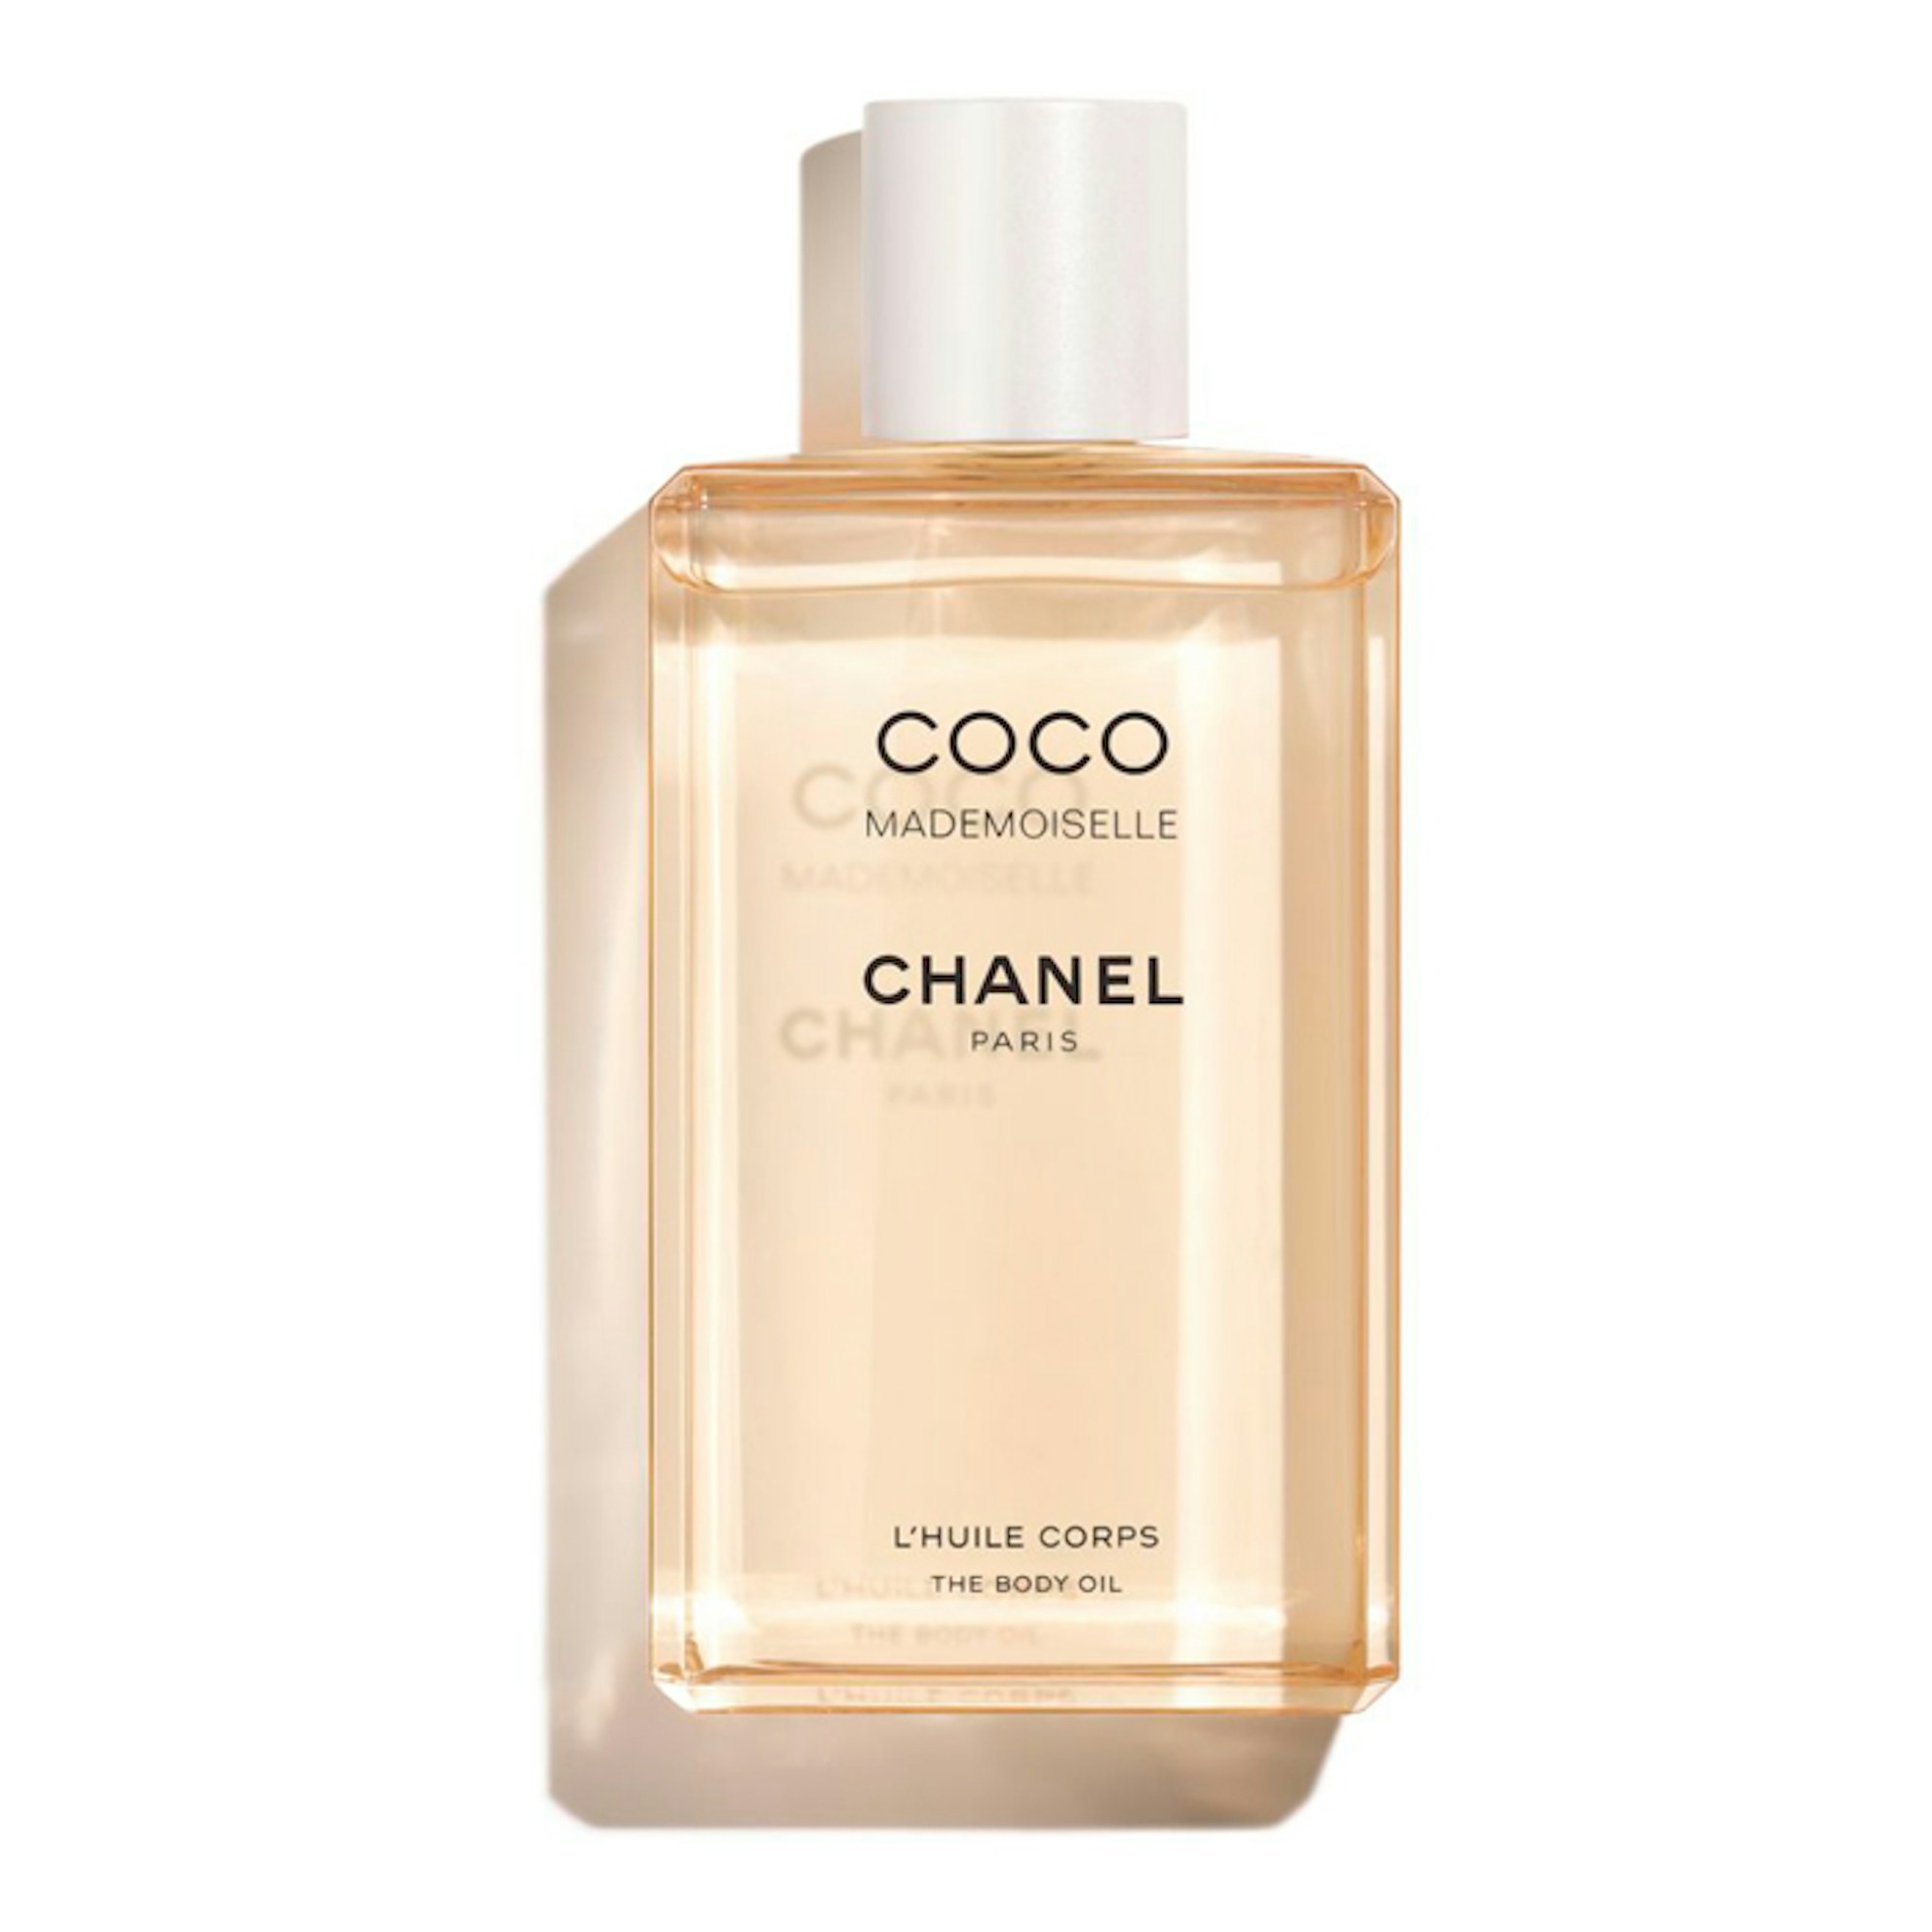 rose gold chanel perfume